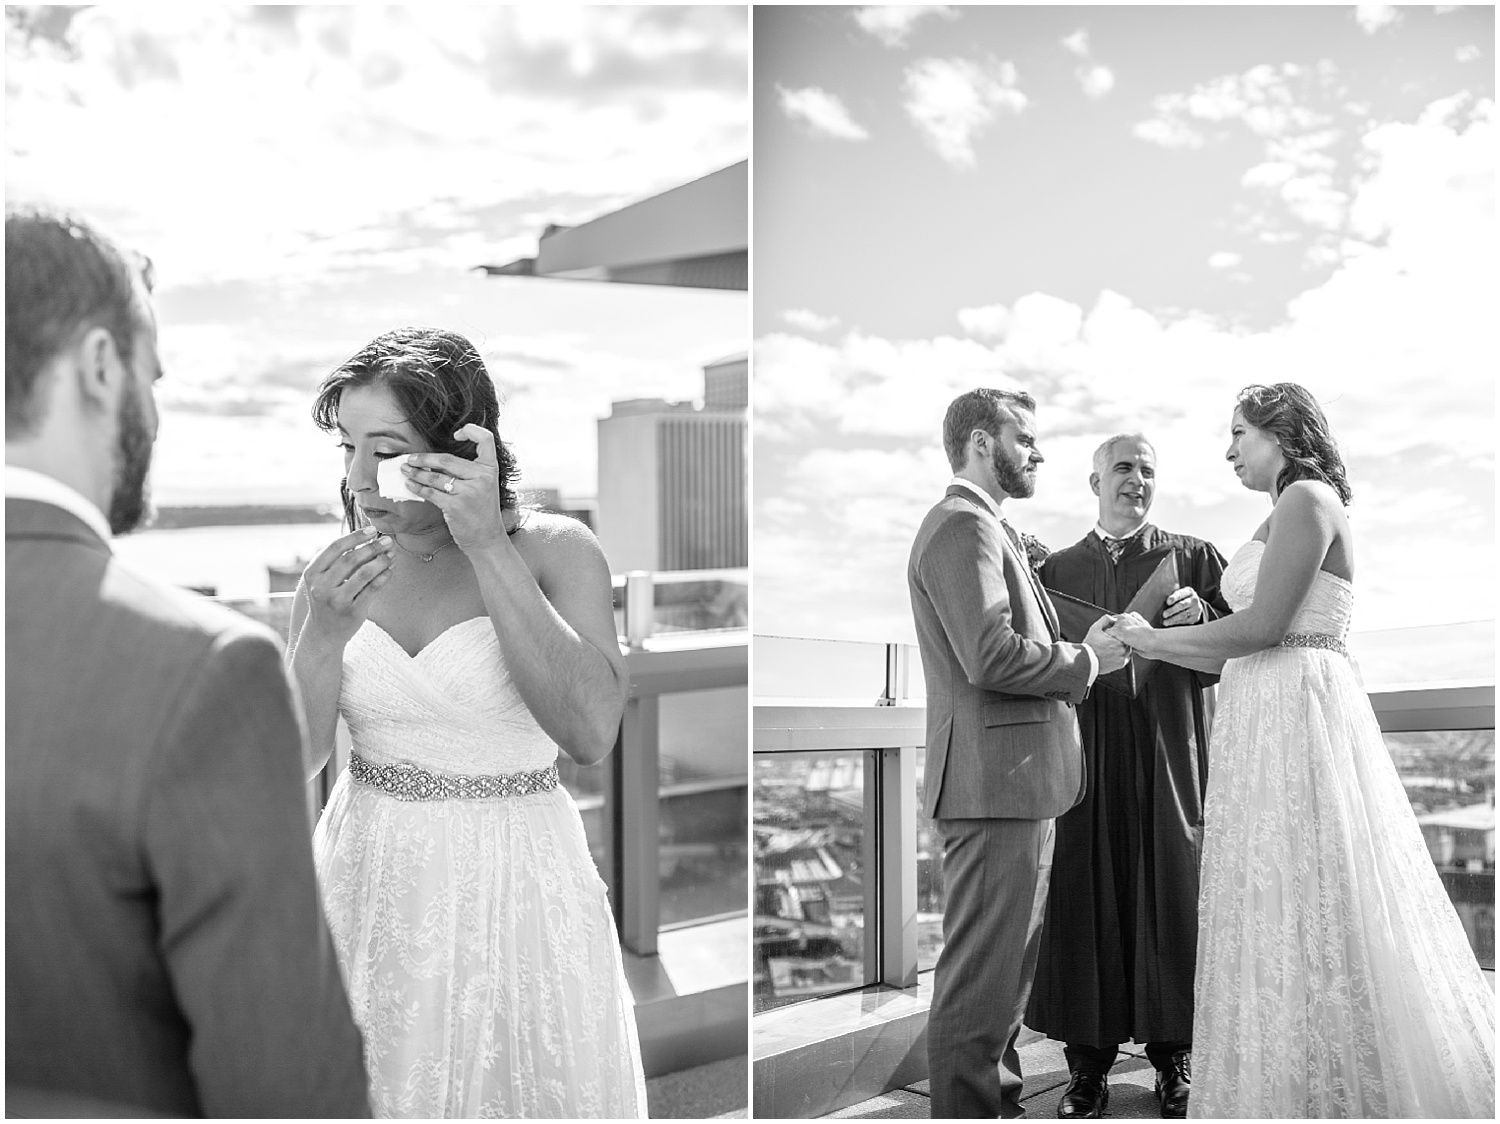 Seattle Municipal Court wedding ceremony on the rooftop.